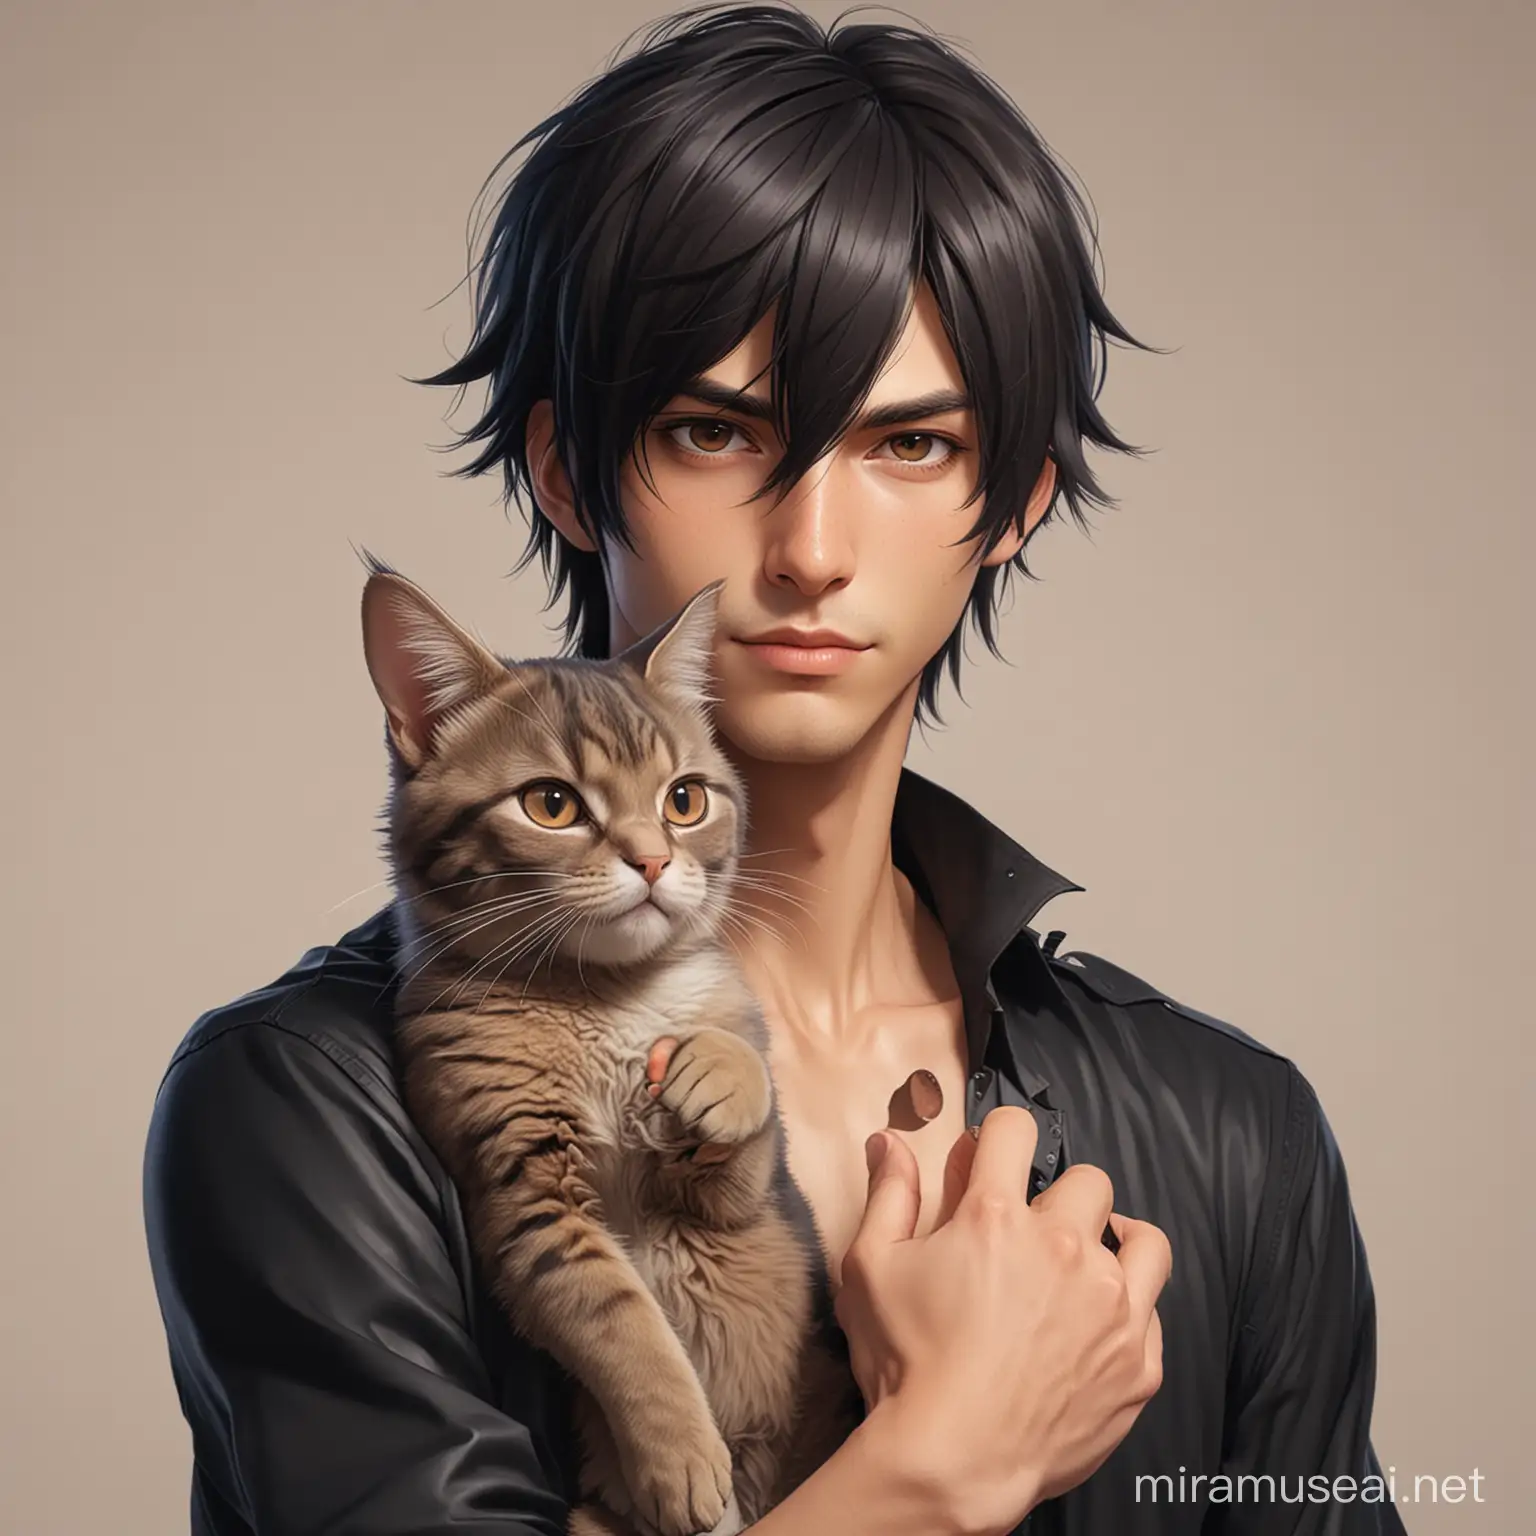 anime rabbit man with black hair, he is holding an anime cat woman with brown hair.